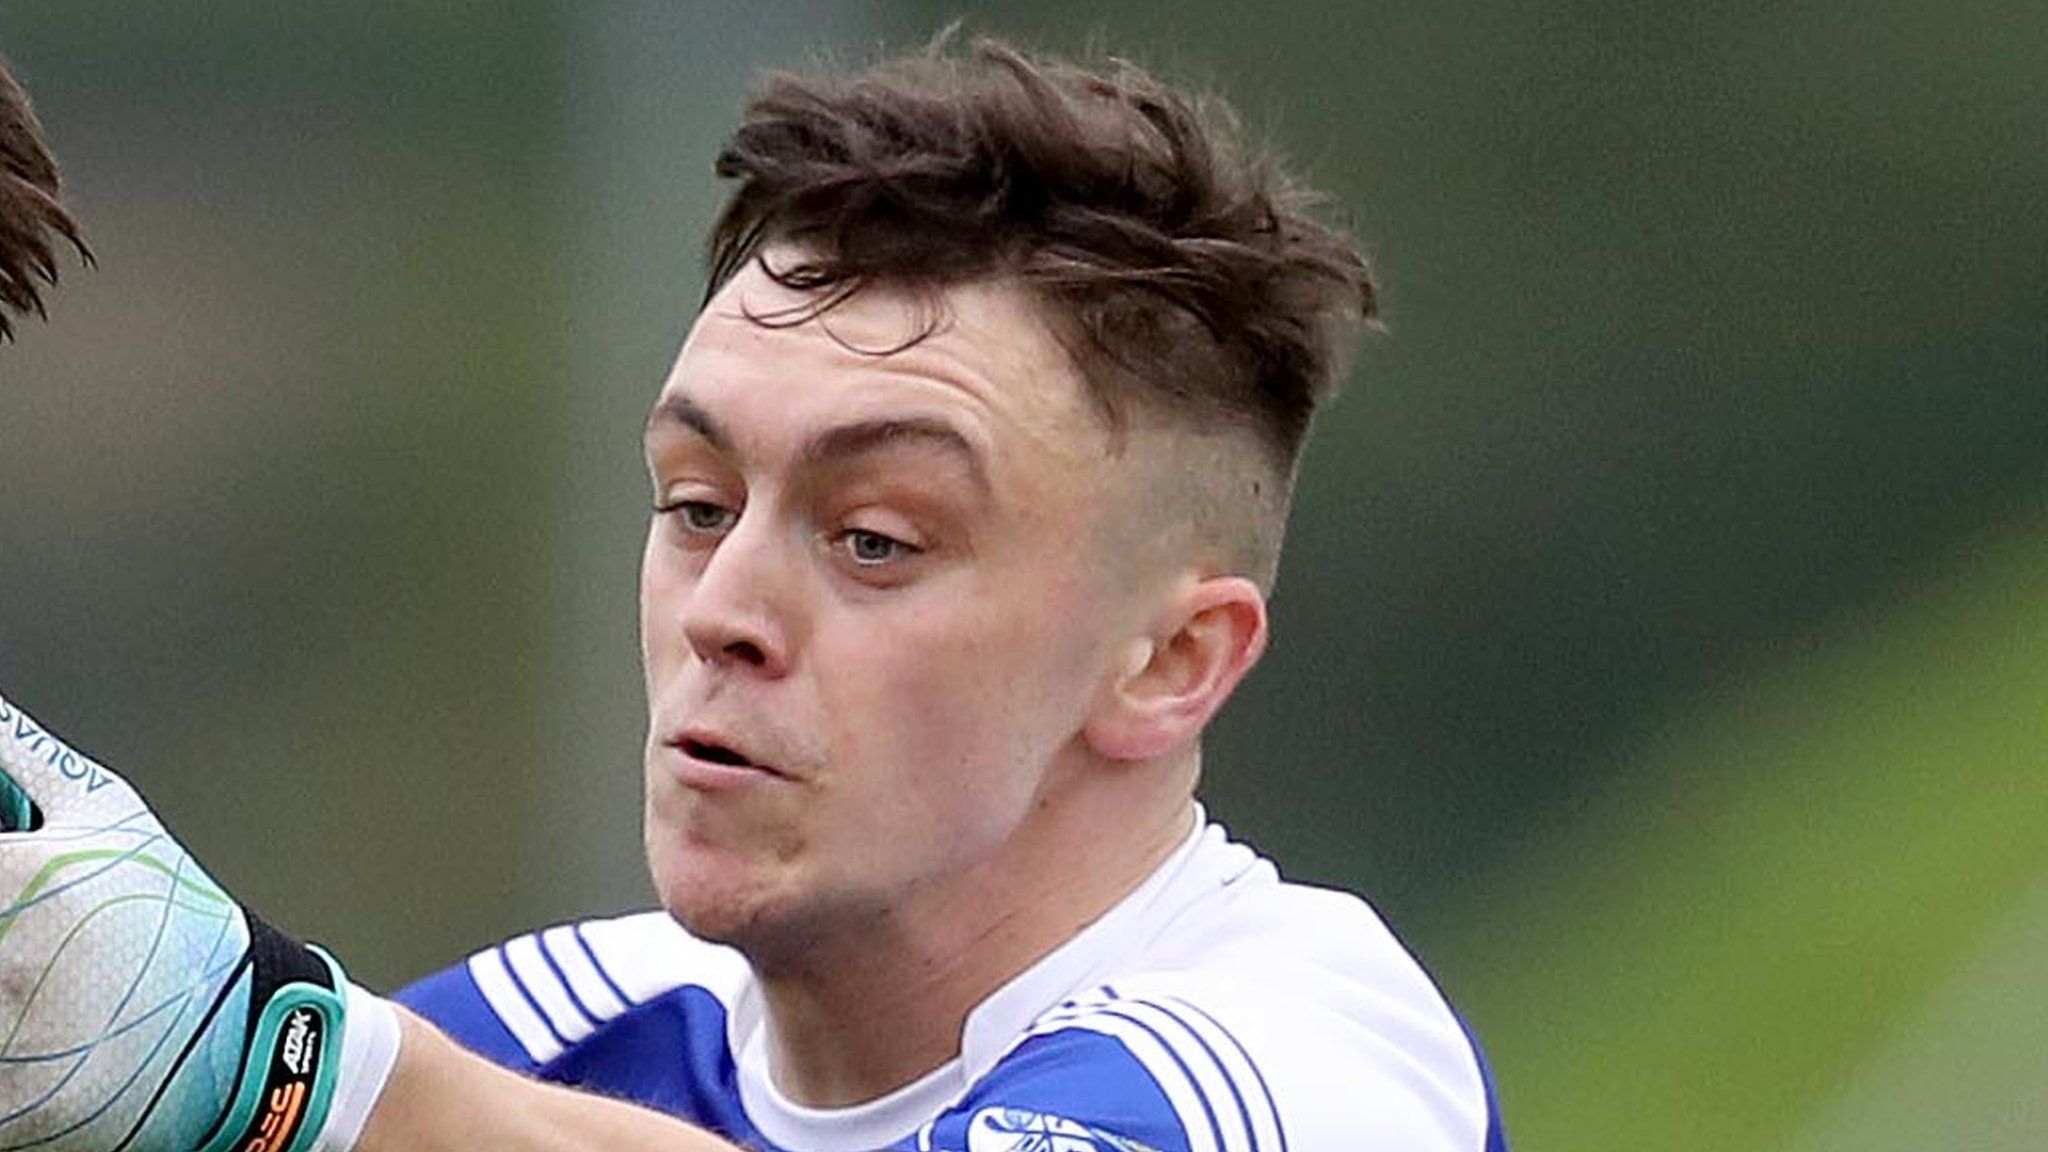 Barry Fortune's goal last in injury-time helped Cavan Gaels snatch victory over unlucky Derrygonnelly